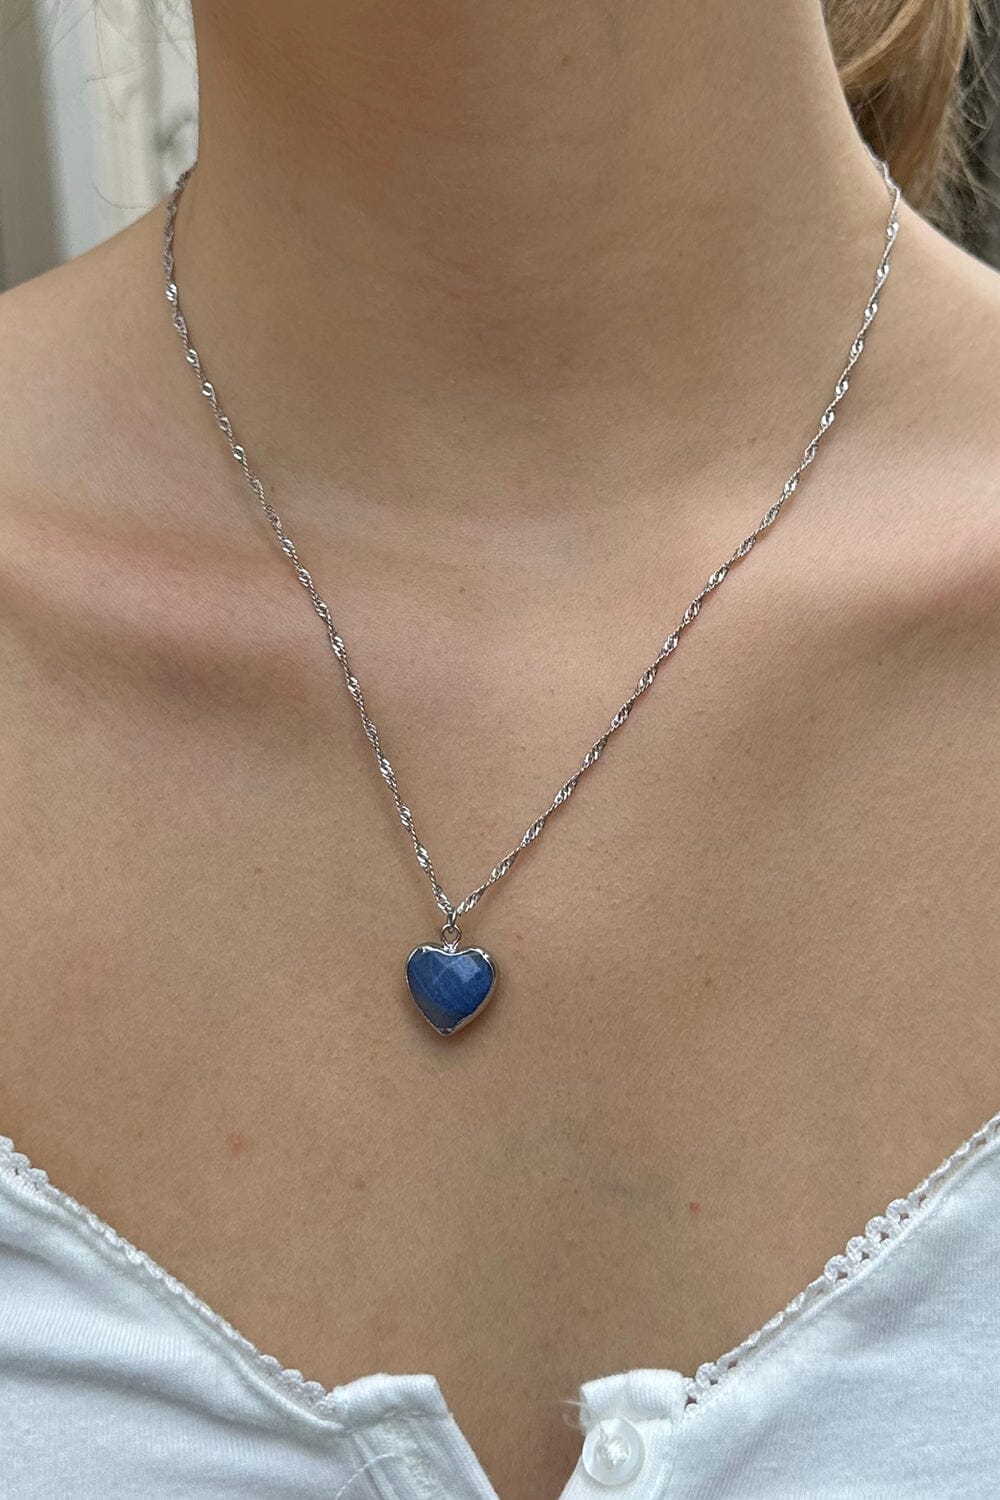 RVM Jewels Silver Long Chain Pendant Necklace Blue Stone Heart Multilayer  Solitaire Jewelry Metal Pendant Price in India - Buy RVM Jewels Silver Long  Chain Pendant Necklace Blue Stone Heart Multilayer Solitaire